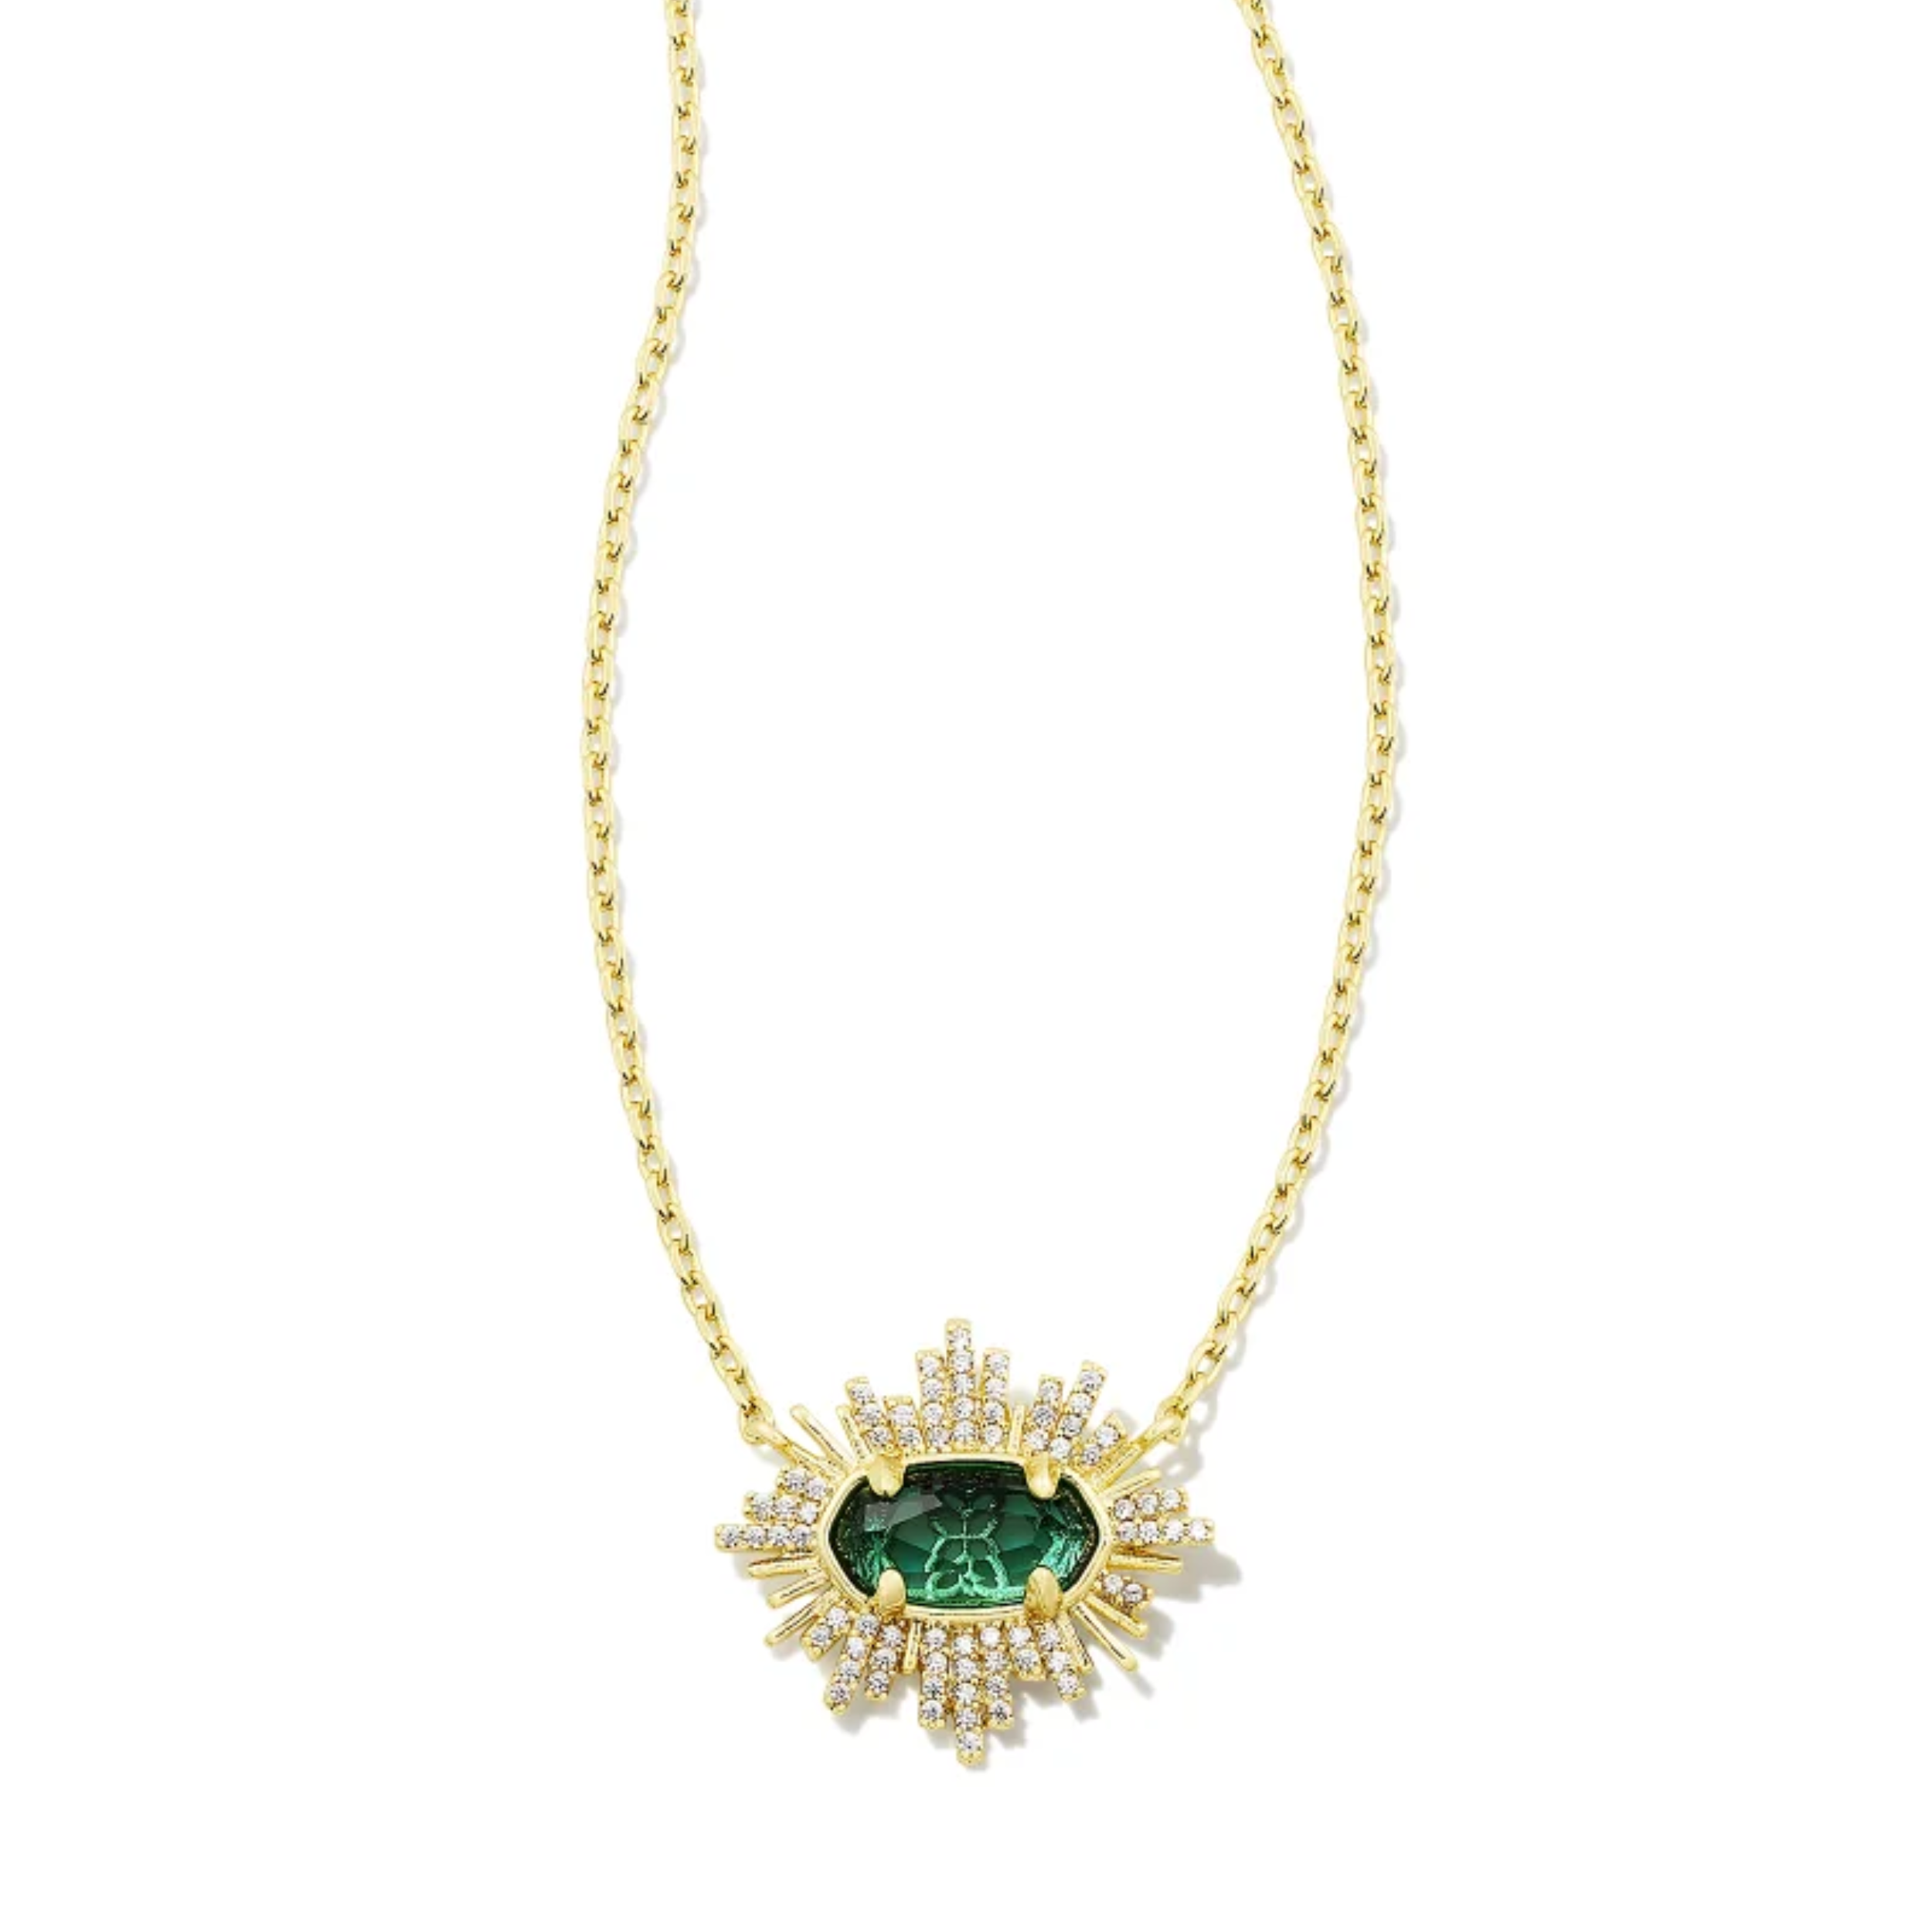 This Grayson Sunburst Gold Frame Pendant Necklace in Green Glass by Kendra Scott is pictured on a white background.